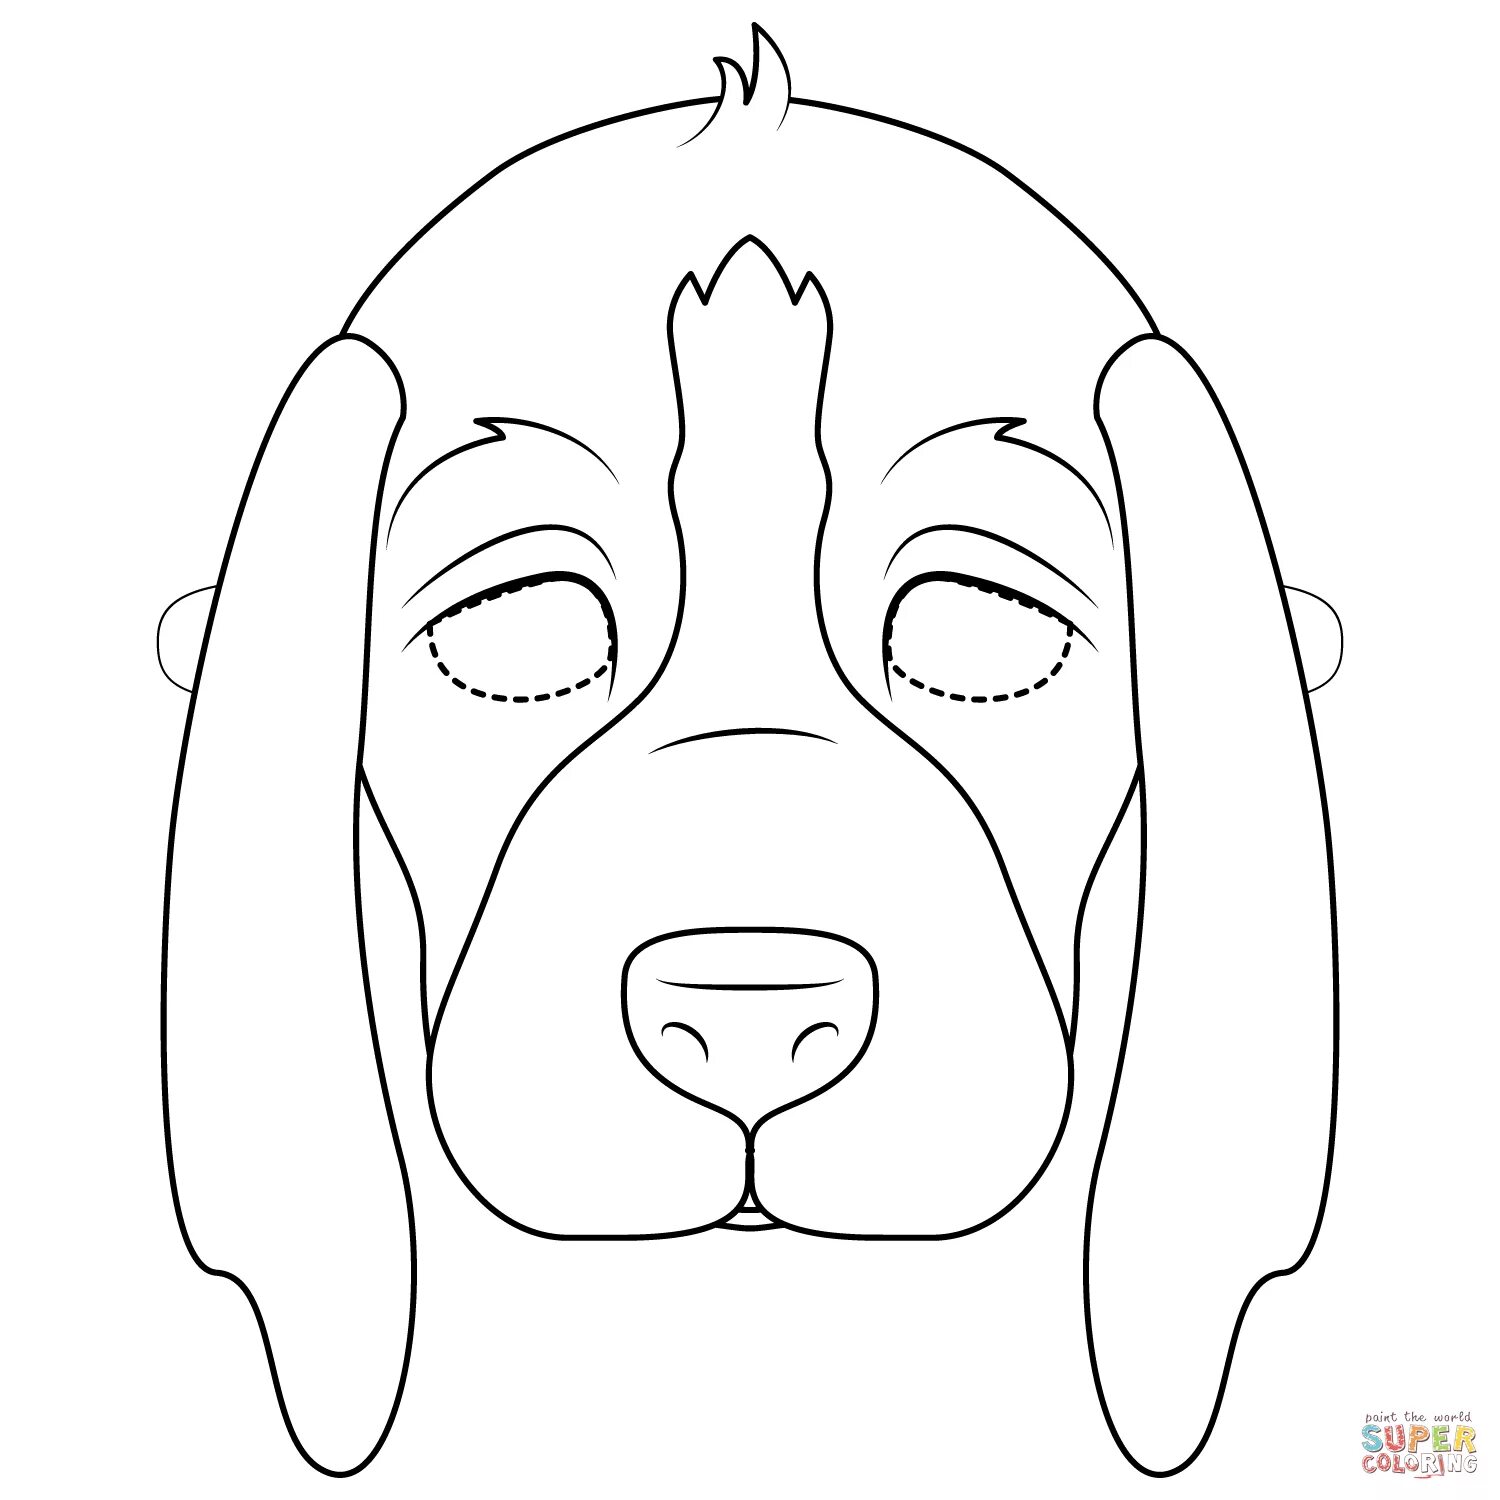 Coloring page mysterious dog head